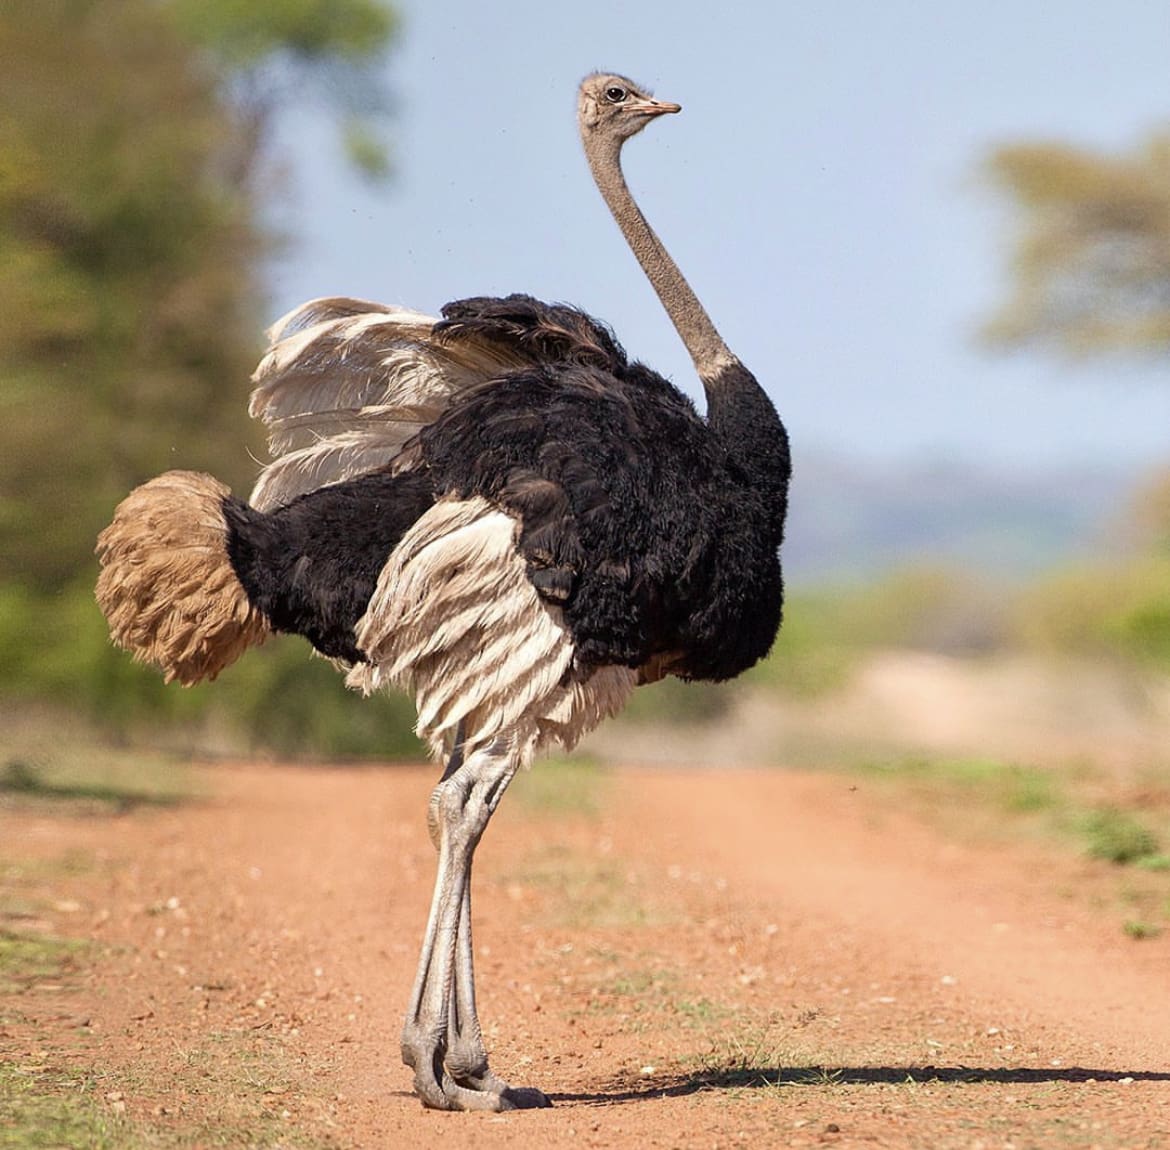 One of the most iconic birds in South Africa - Ostrich in the road in Kruger National Park